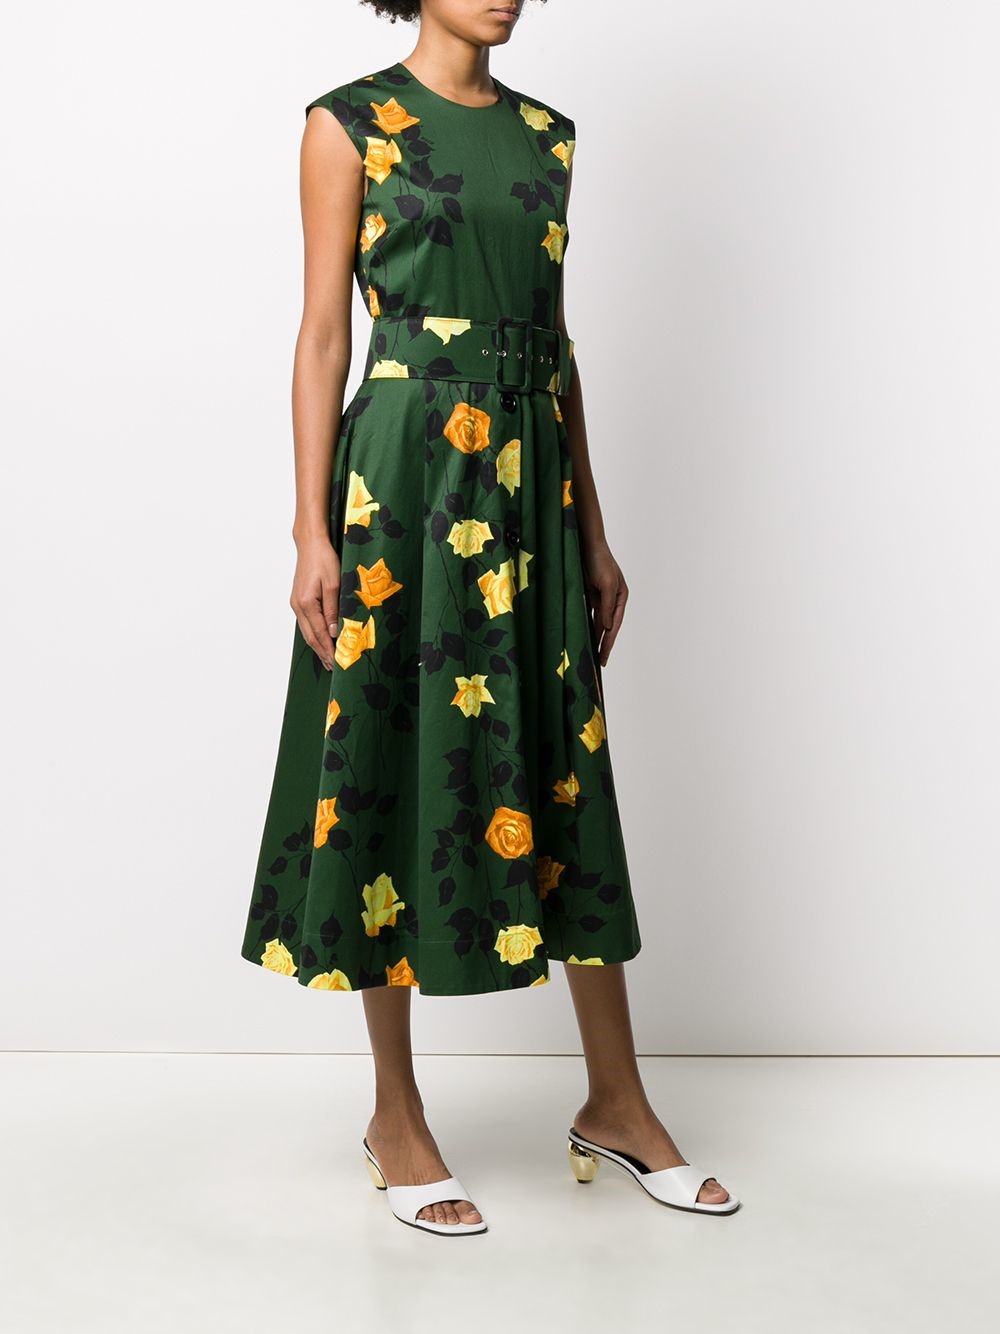 msgm FLORAL PRINT DRESS available on ...